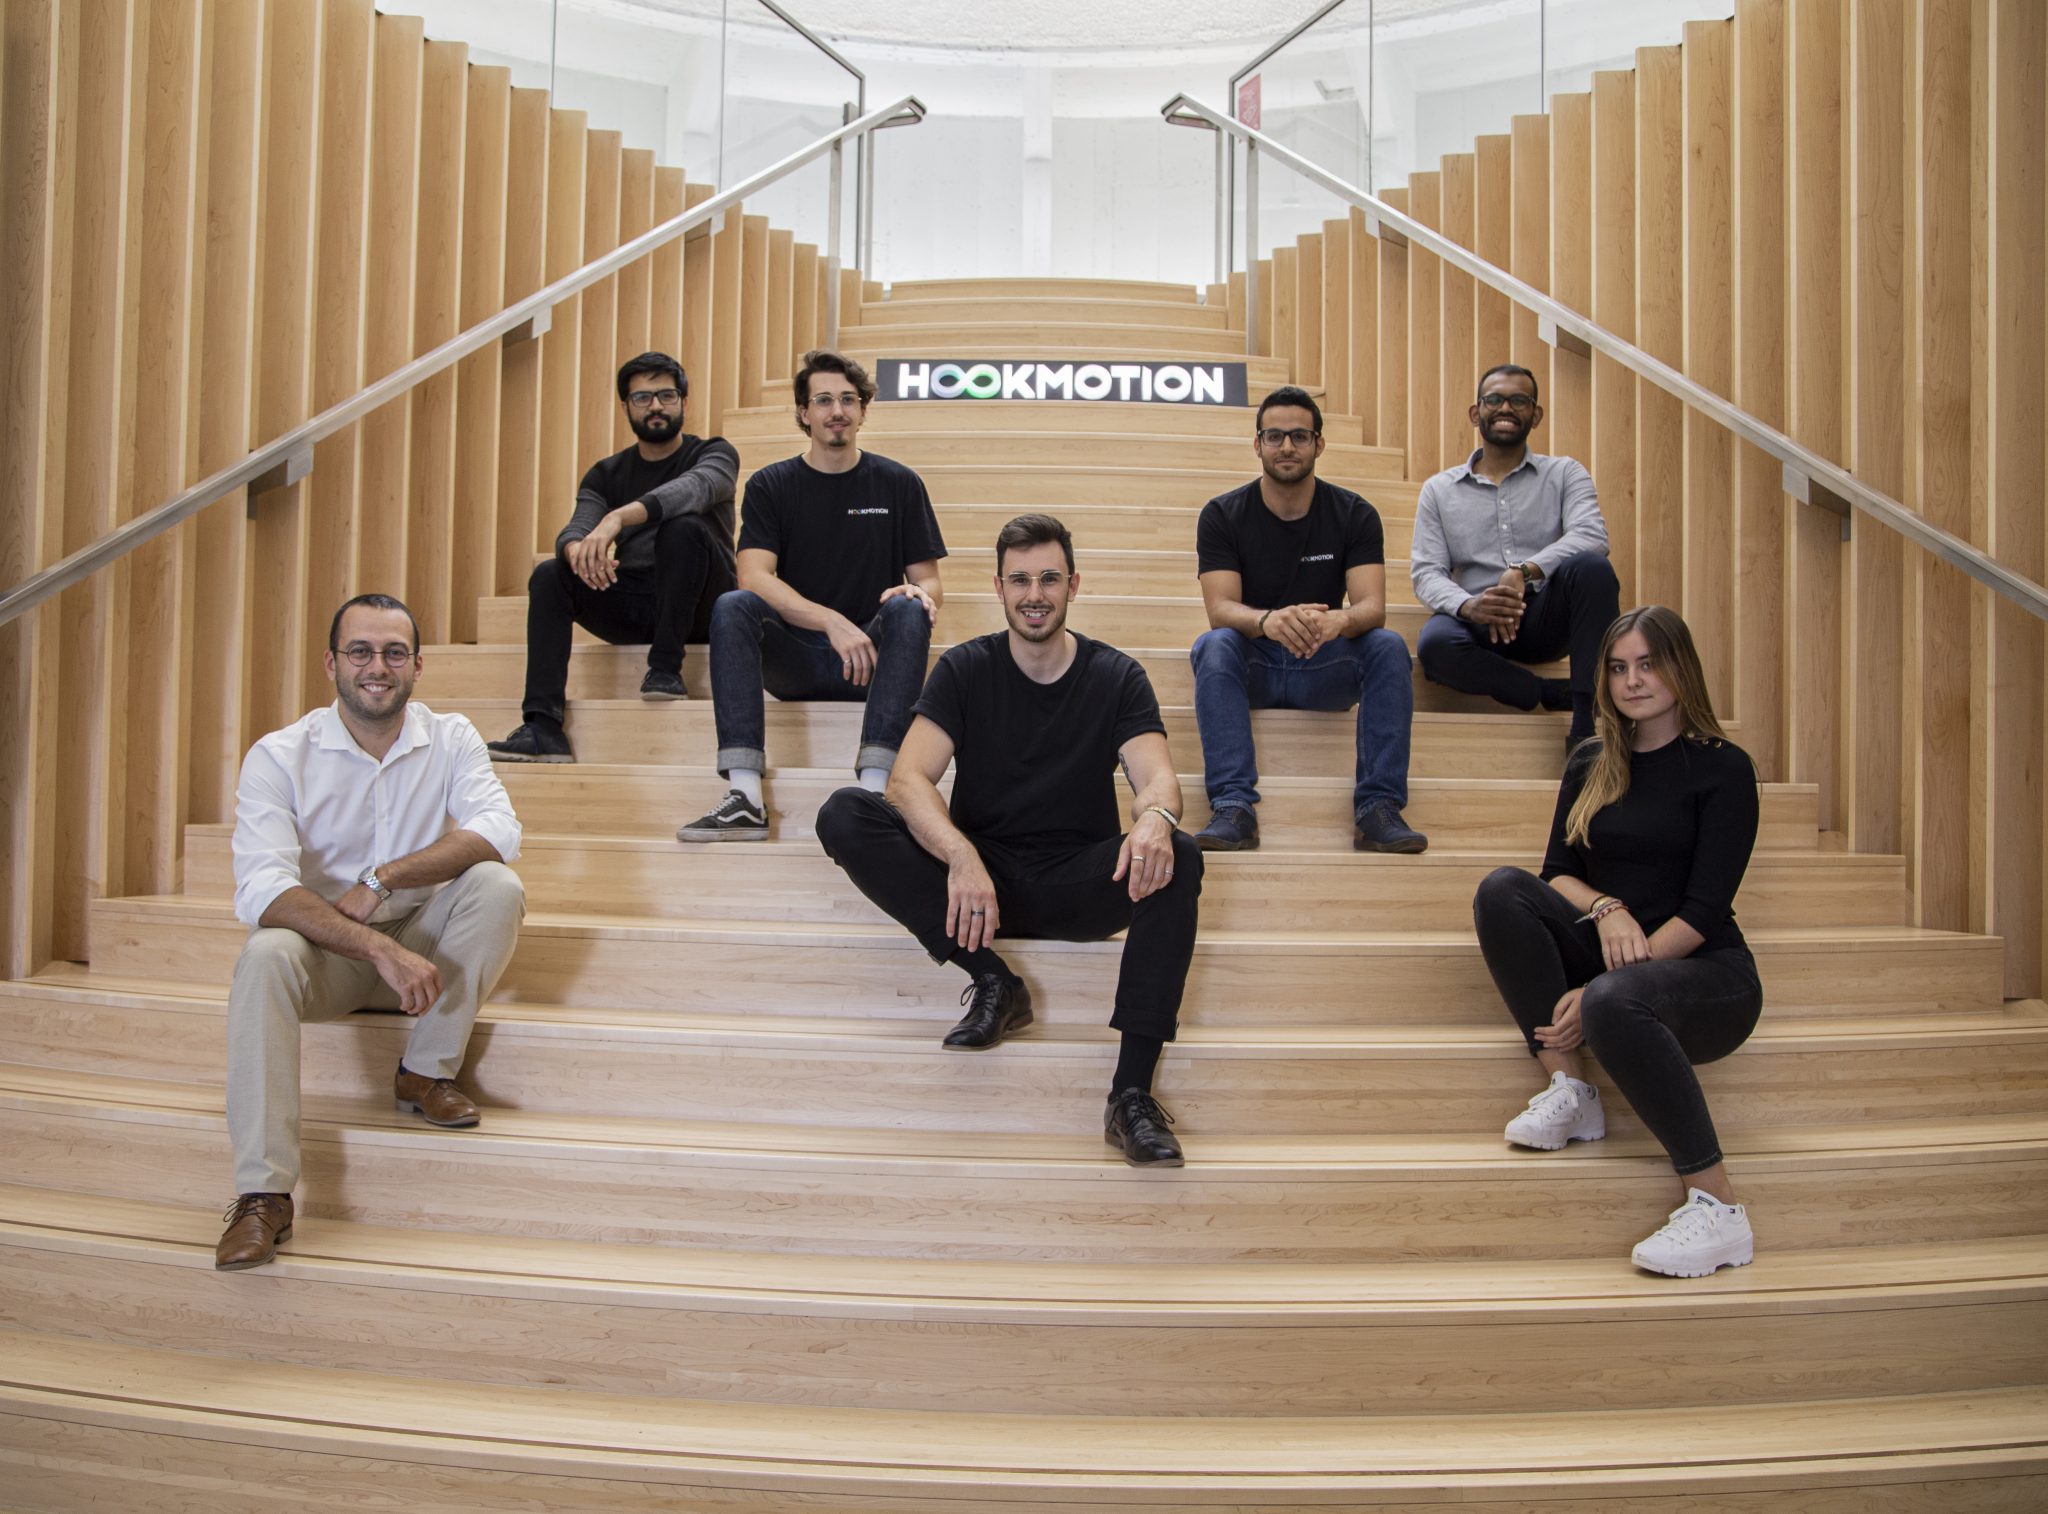 LOTO QUEBEC-BY ENCOURAGING THE MONTREAL-BASED STARTUP— WHICH SPECIALIZES IN ARTIFICIAL INTELLIGENCE—LOTOQUÉBEC IS HELPING TO PROMOTE THE CREATIVITY AND KNOW-HOW OF LOCAL ENTREPRENEURS